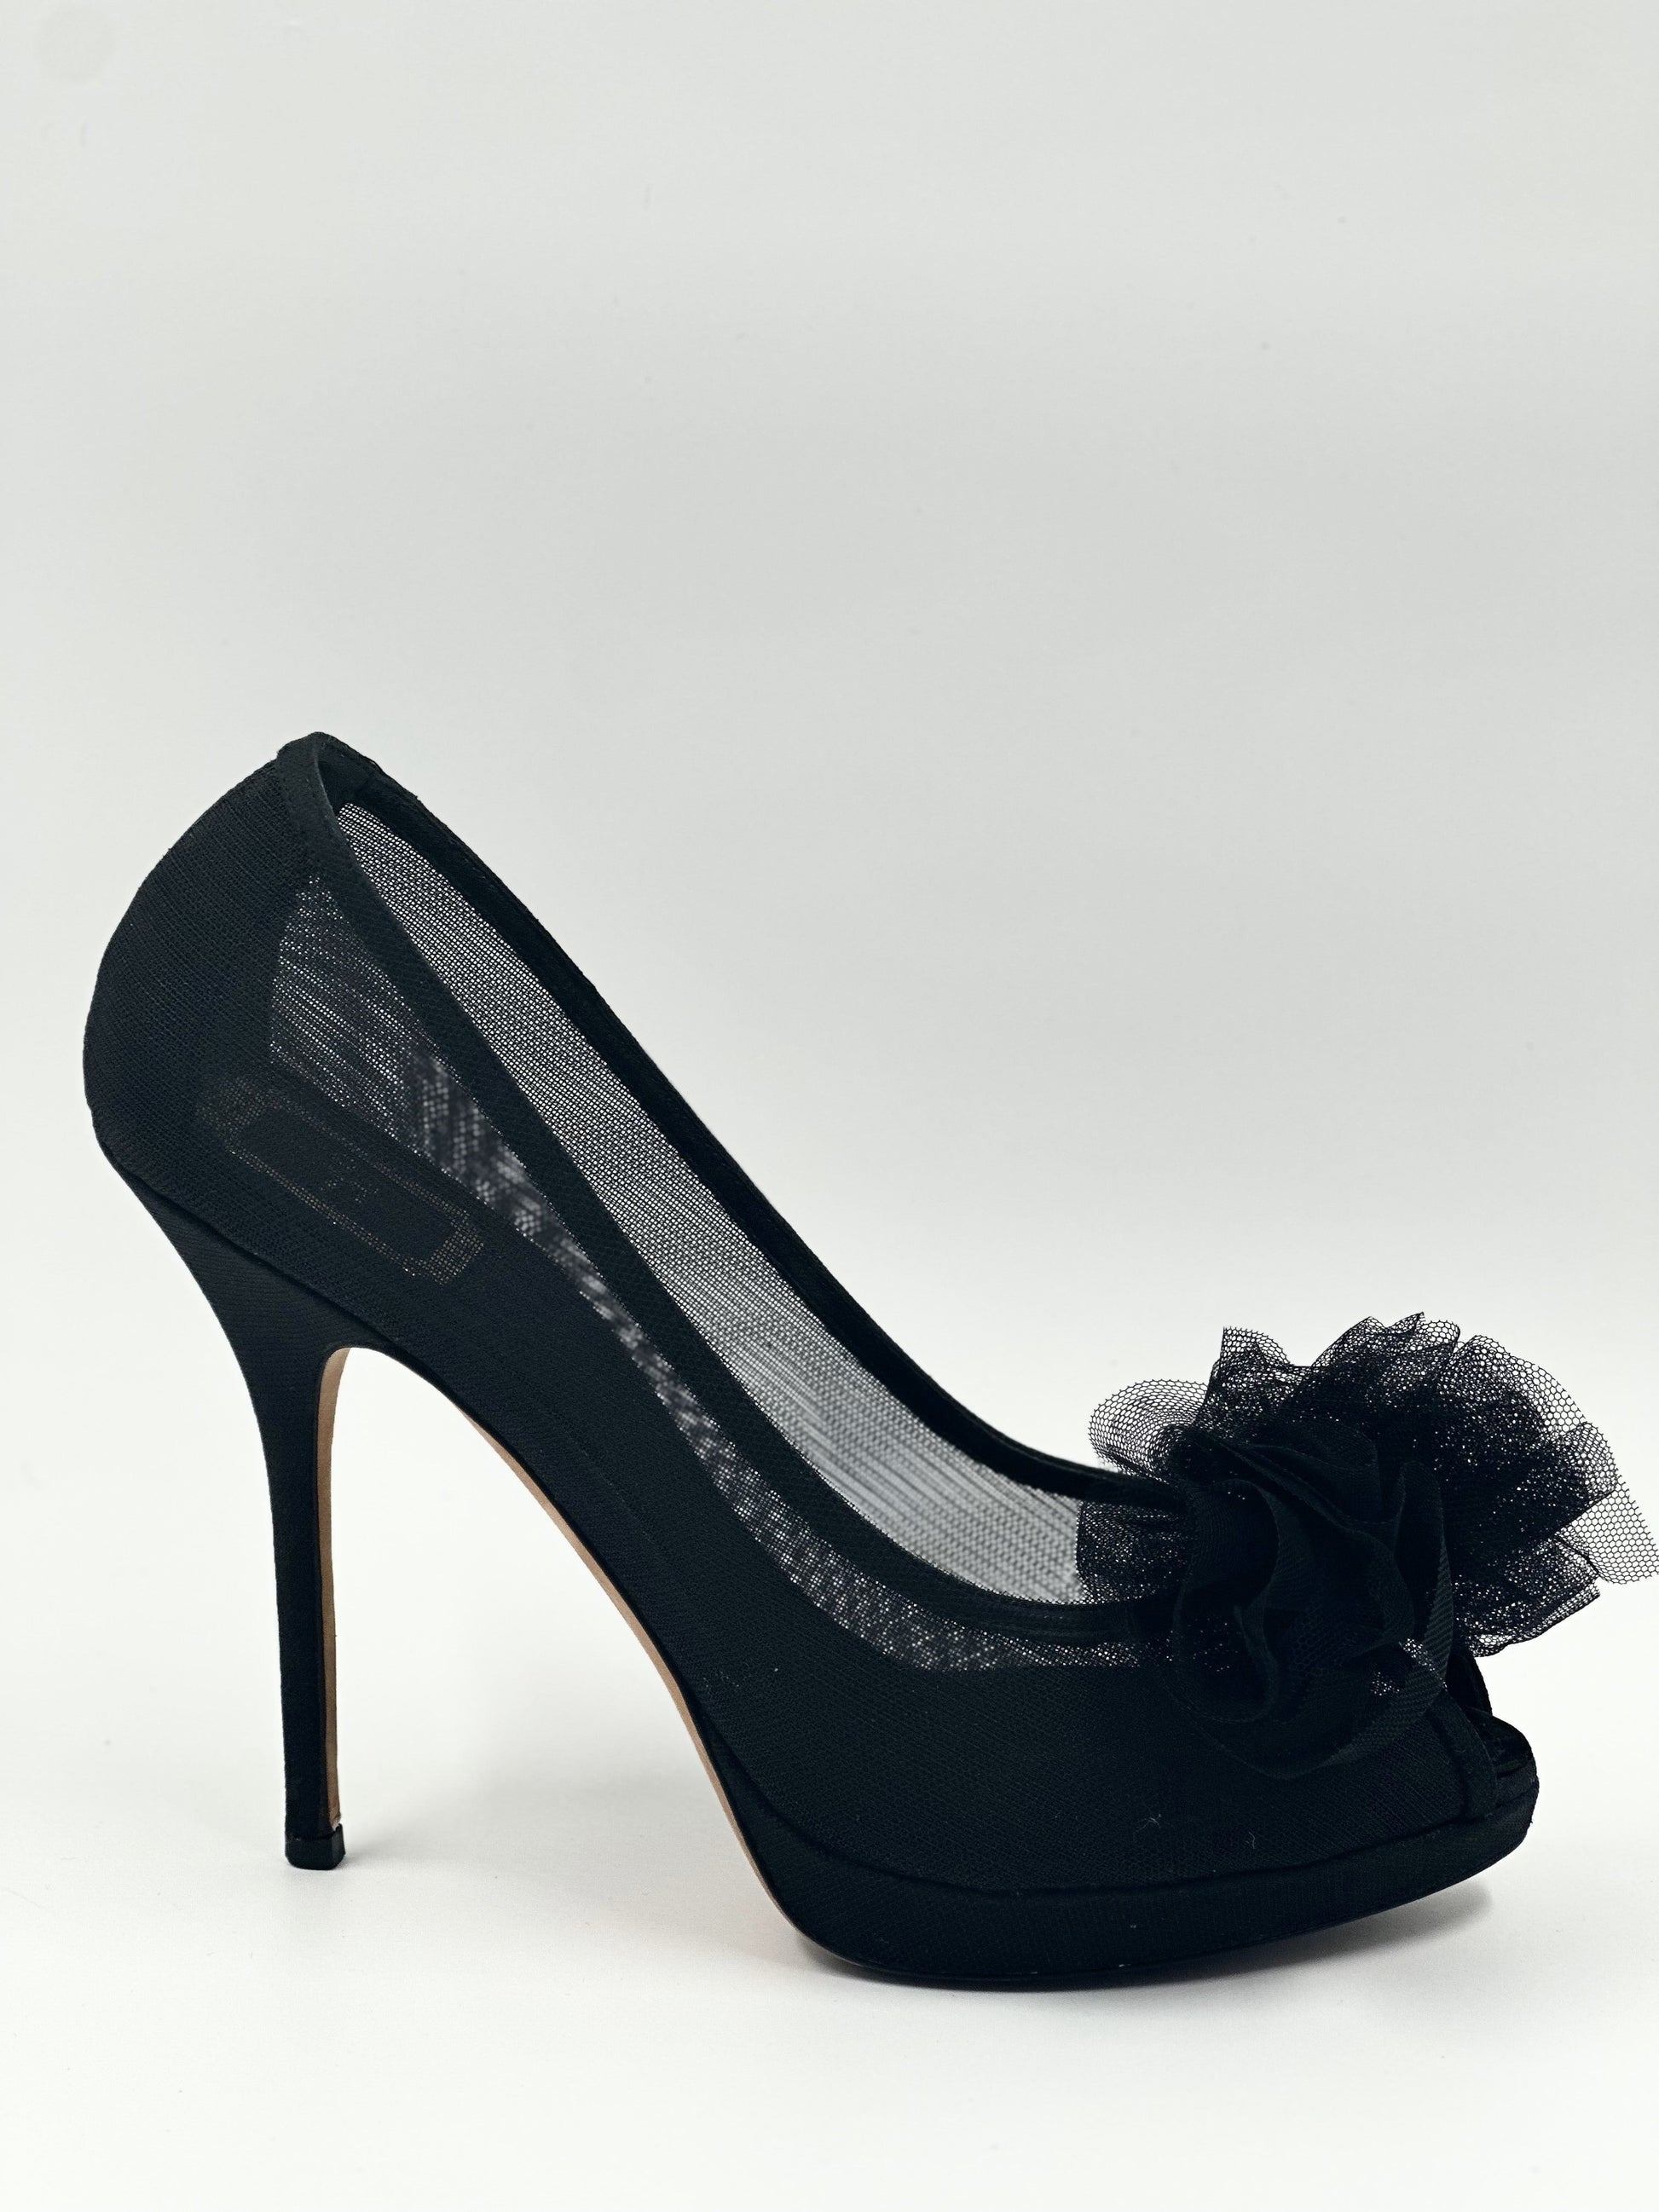 CHRISTIAN DIOR Black High Heel Pump Peep Toe | Mesh Flower Detail | Size IT 40 | Great Condition | Made in Italy